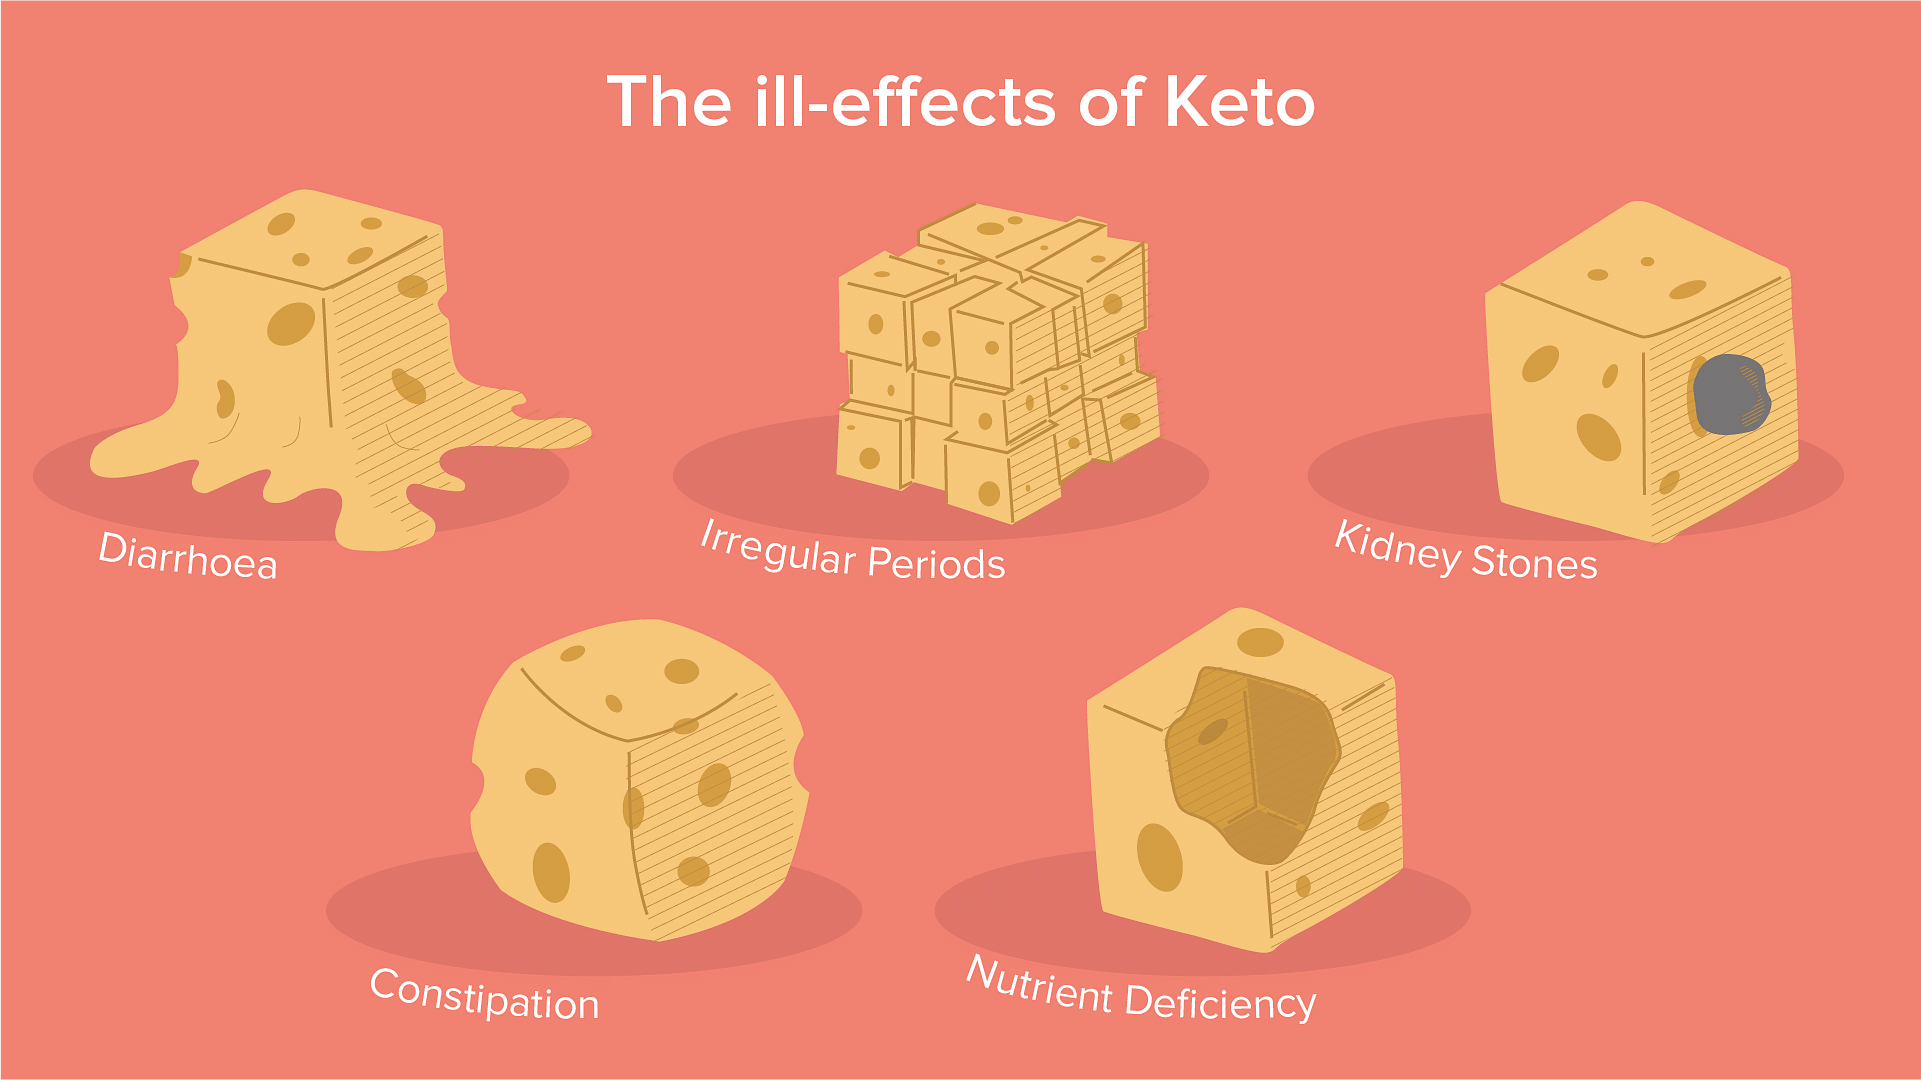 Keto Diet: Is it actually beneficial?